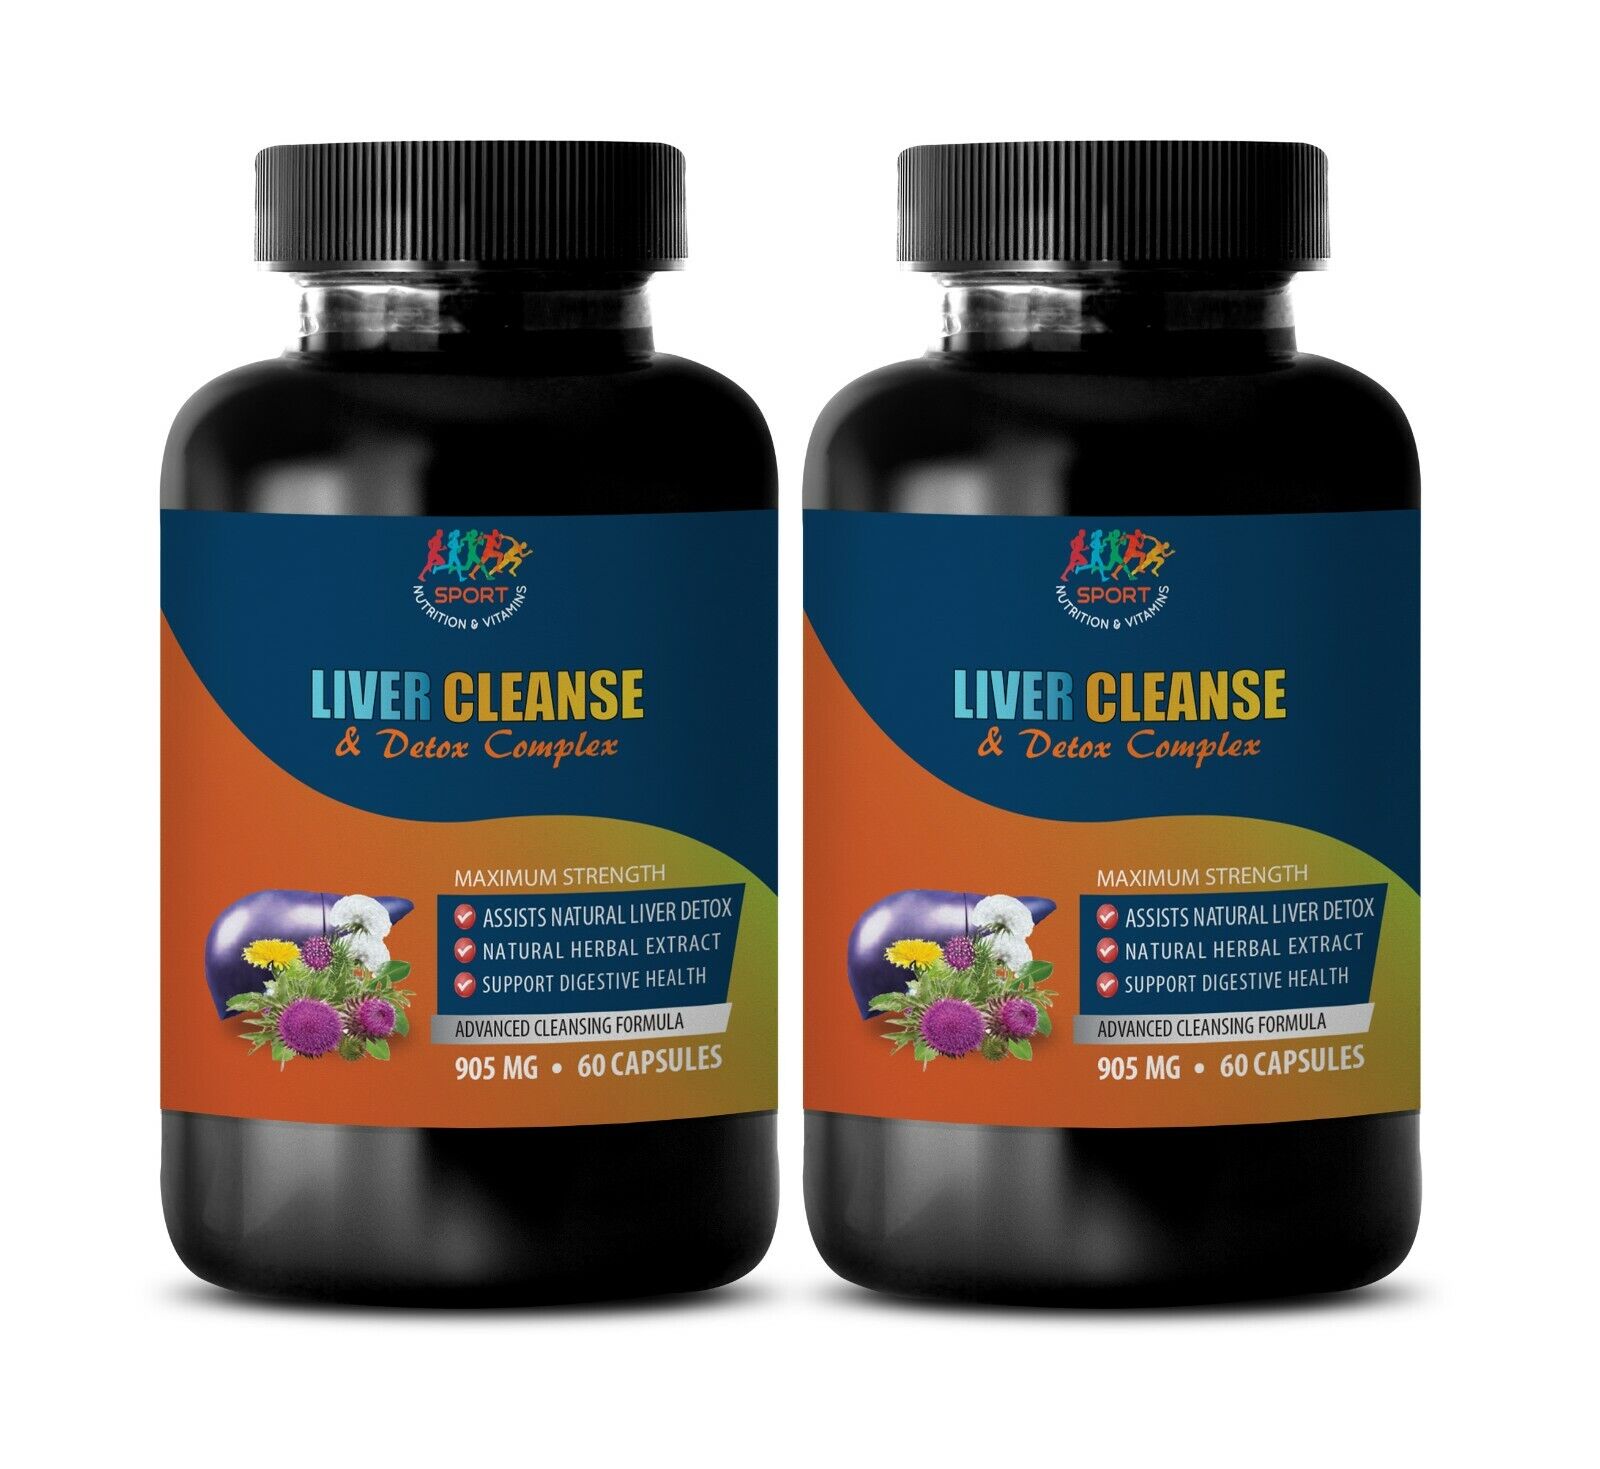 milk thistle capsules - Liver Cleanse and Detox 905mg - vitamin B1 and C 2B